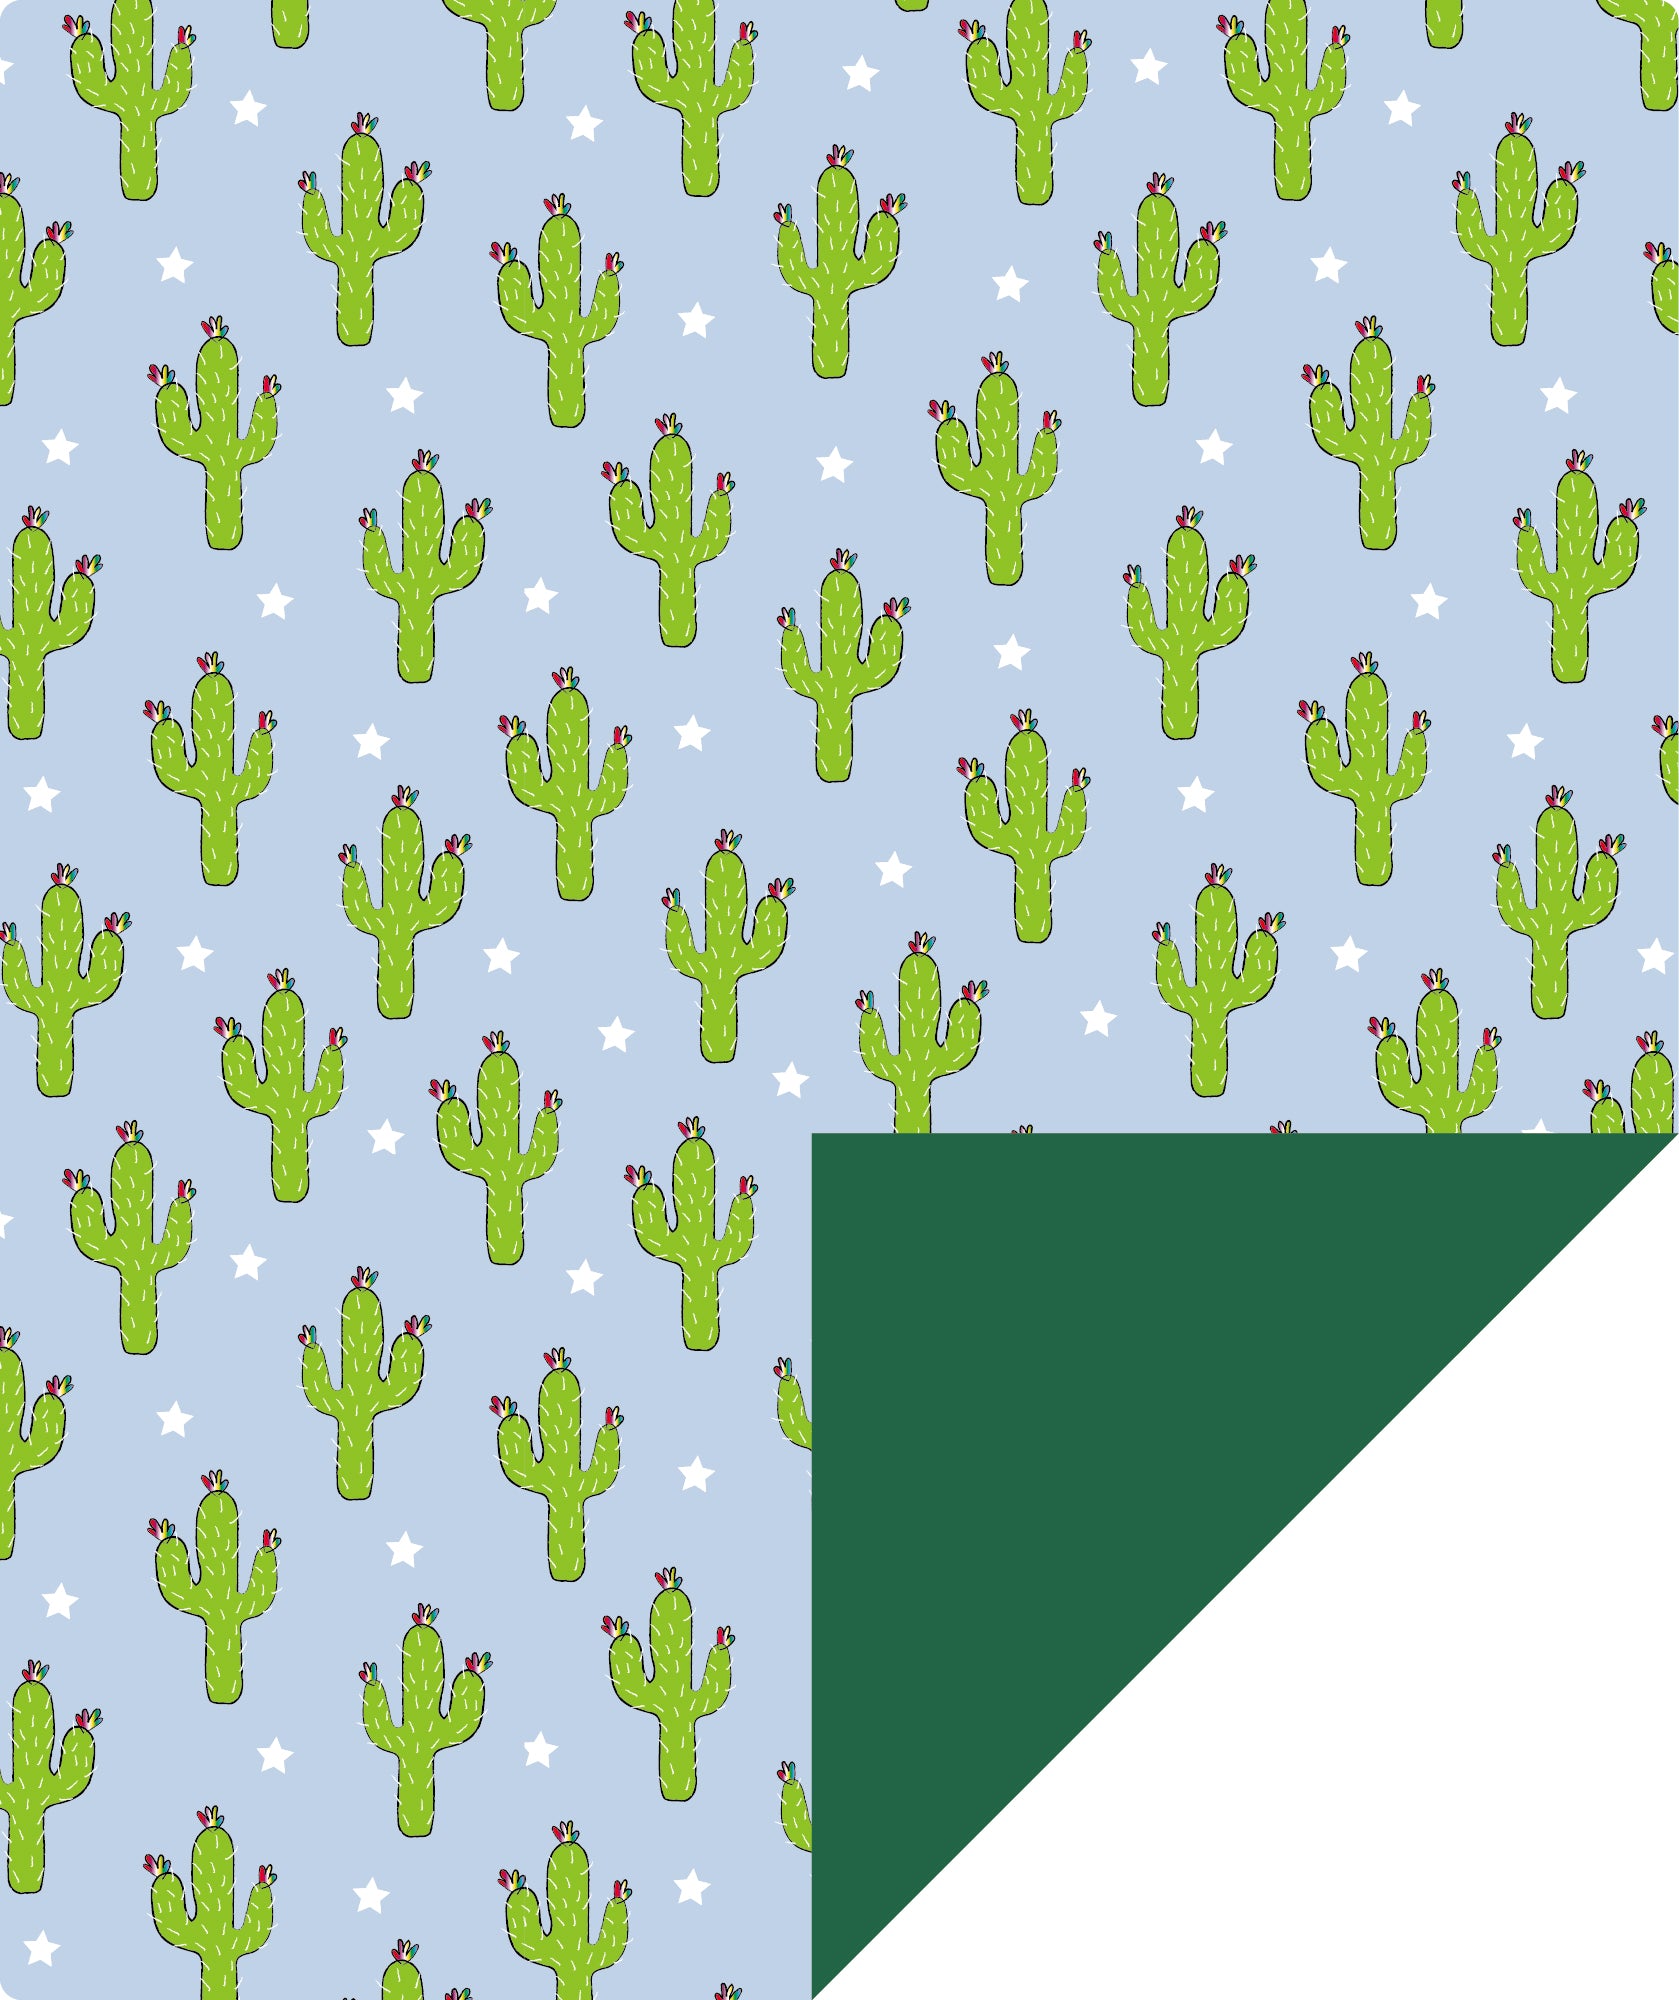 Cactus Foil Wrapping Paper with Green Color Packing Paper Supply Wrapaholic